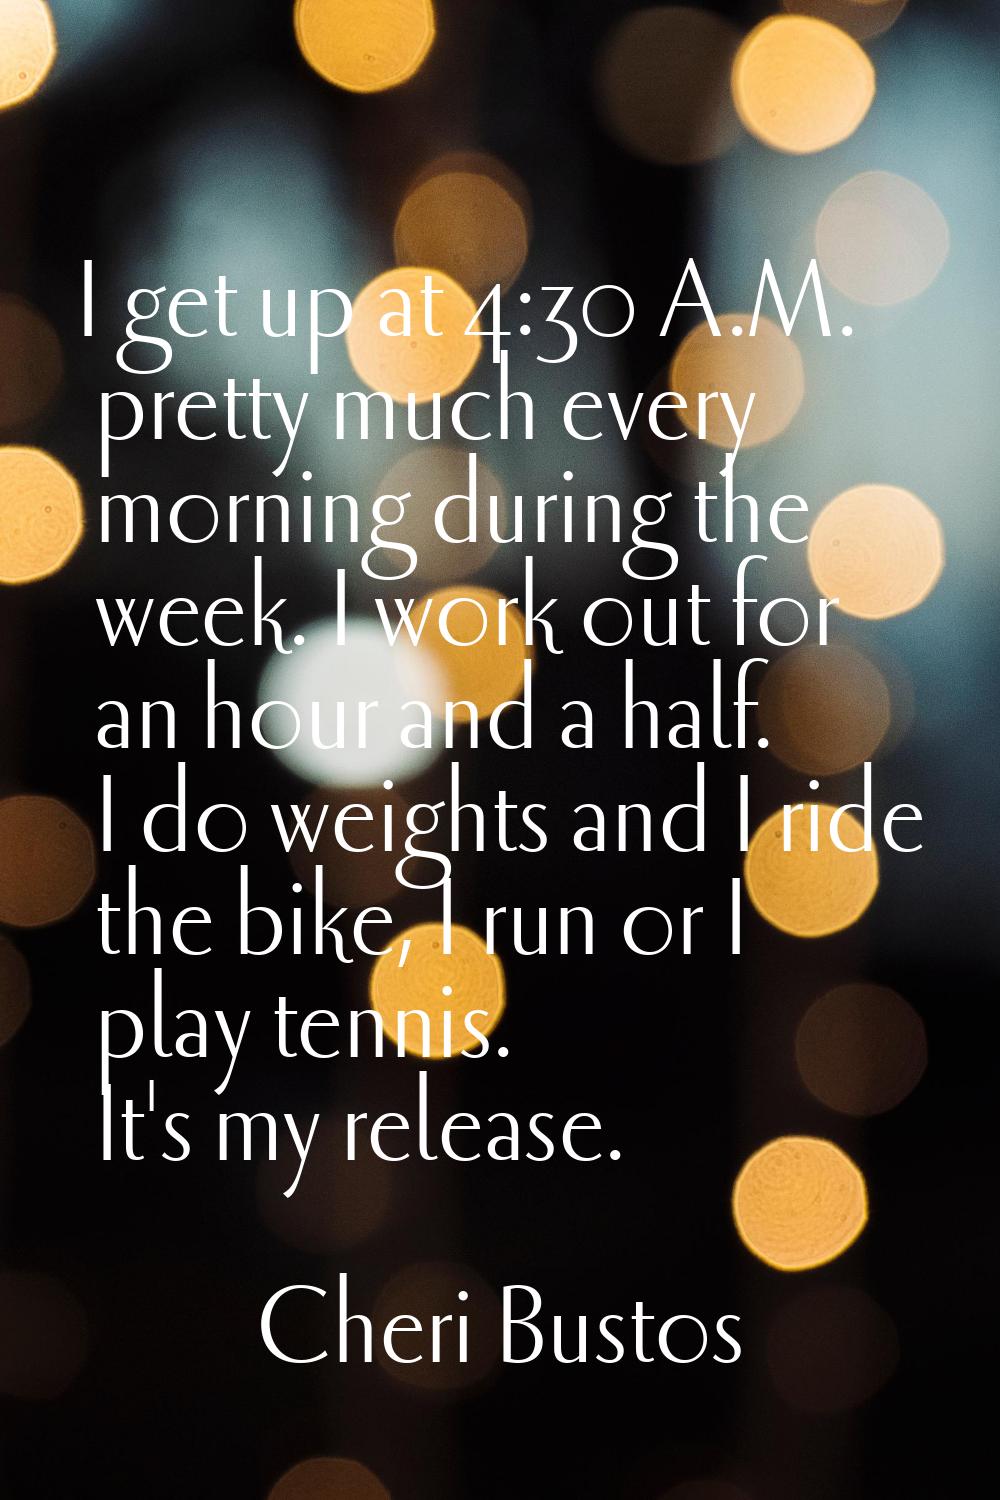 I get up at 4:30 A.M. pretty much every morning during the week. I work out for an hour and a half.